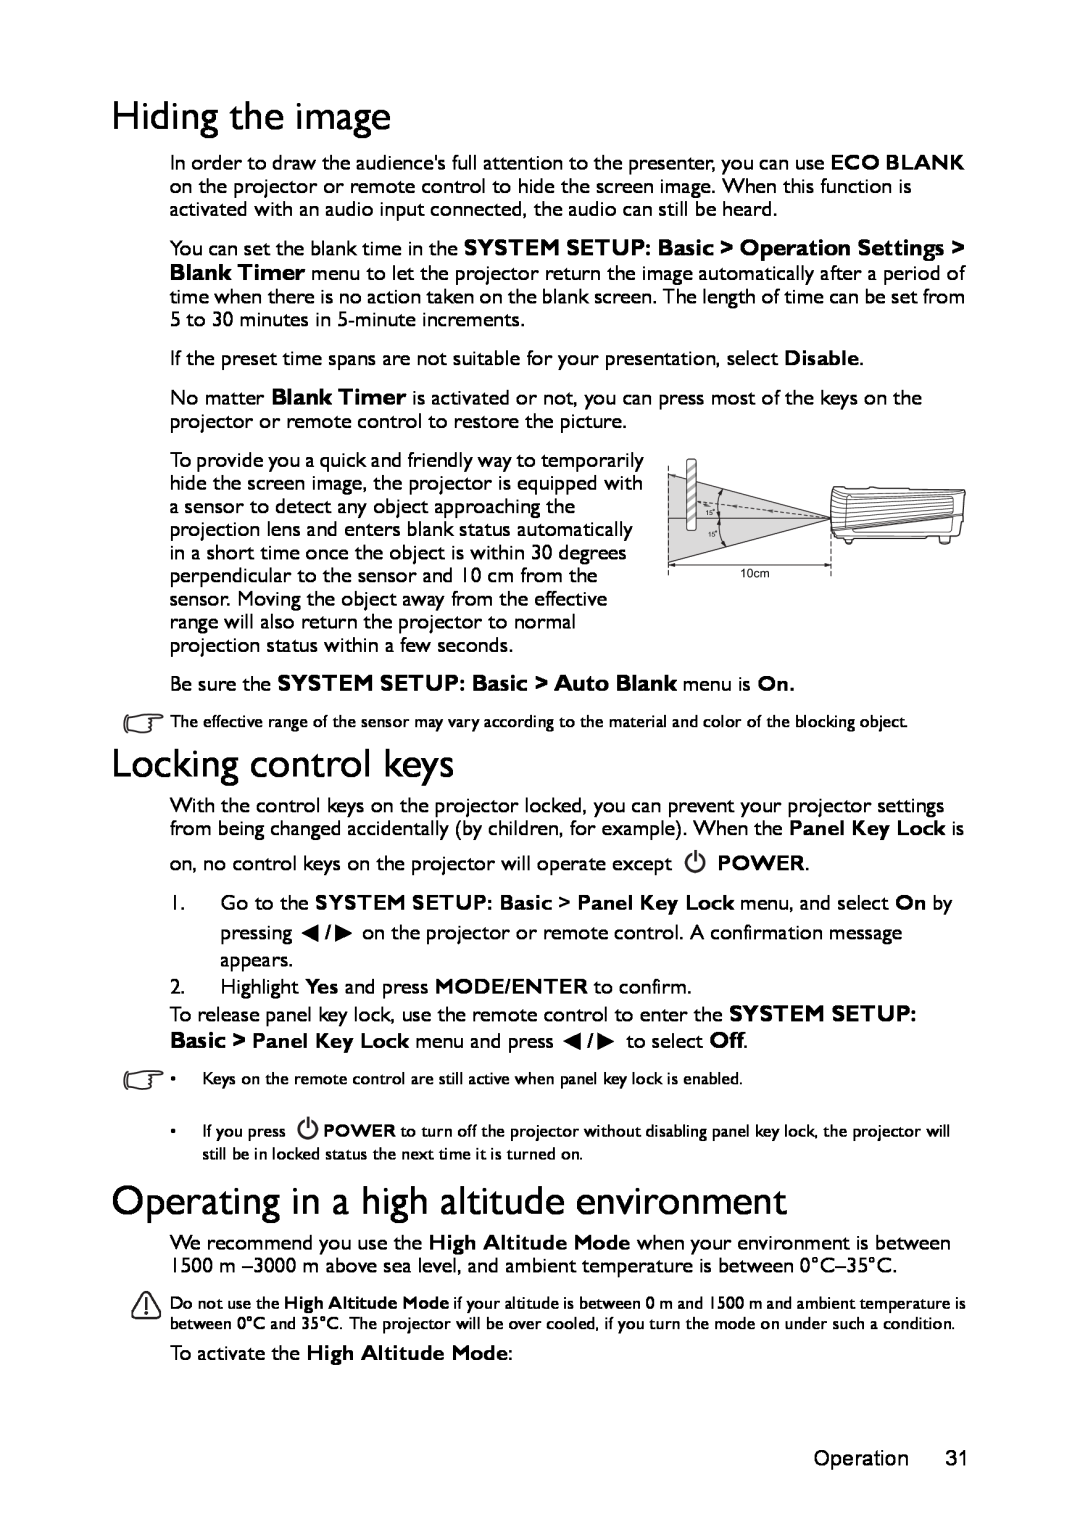 BenQ ms616st, mx618st user manual Hiding the image, Locking control keys, Operating in a high altitude environment 